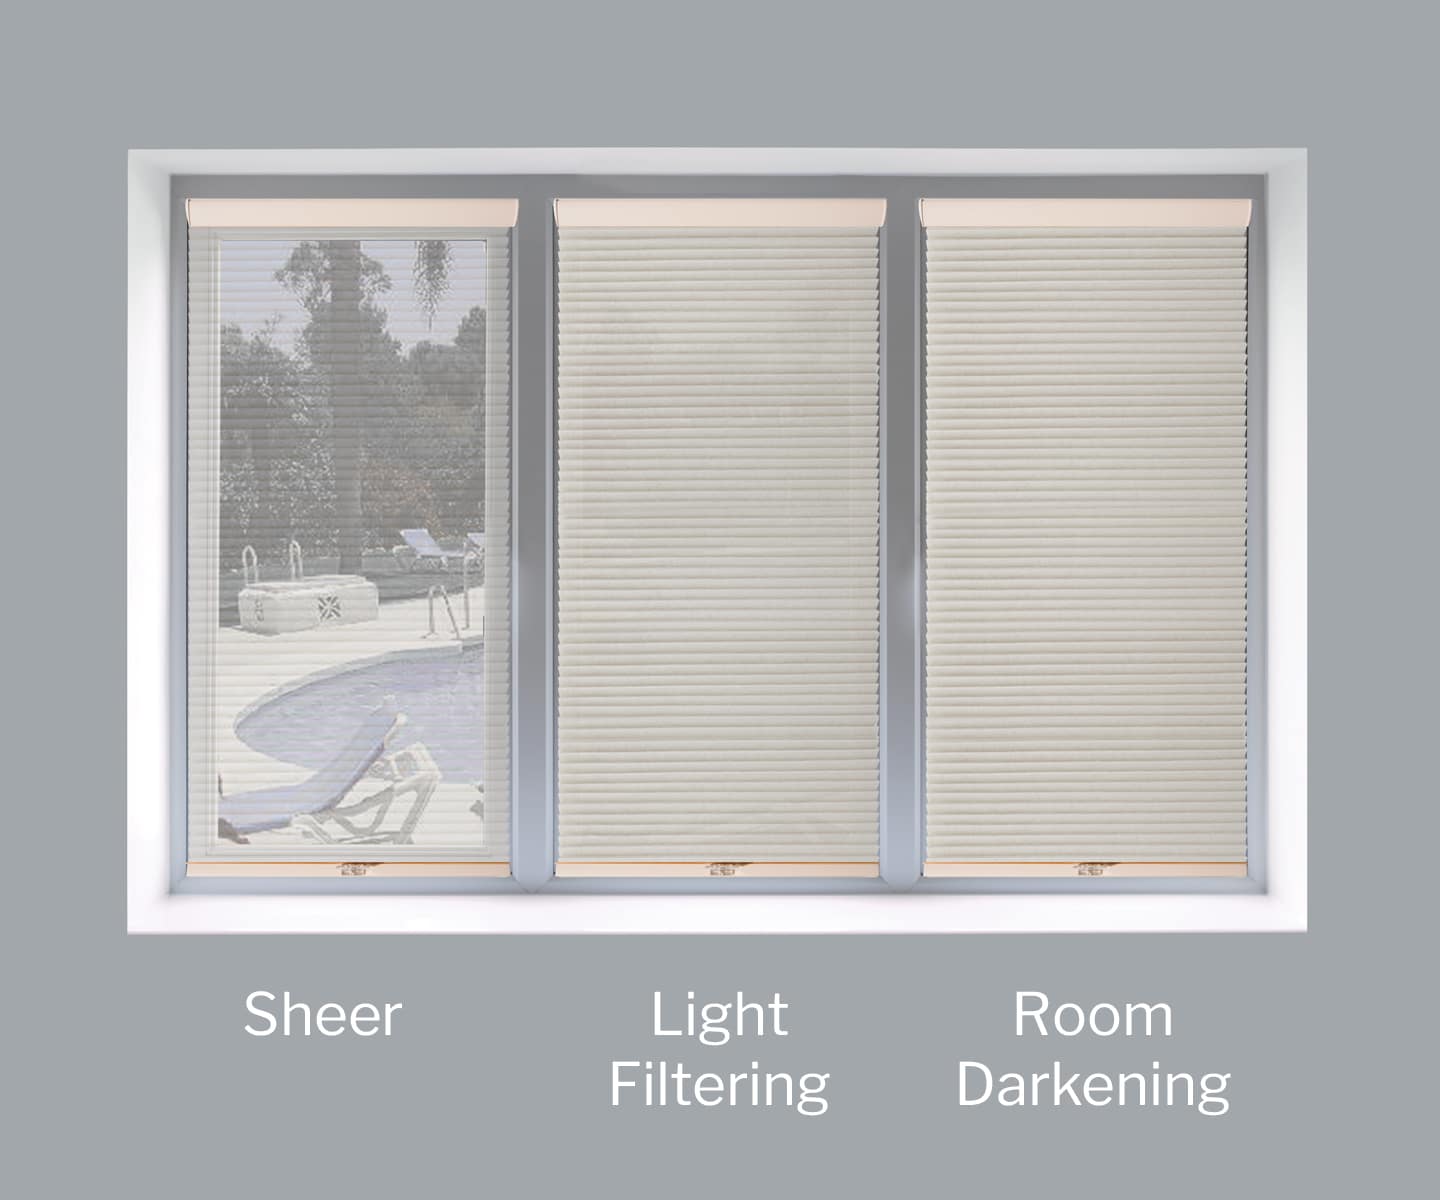 Three different opacities of the Portrait Honeycomb fabrics, ranging from sheer to light filtering to room darkening